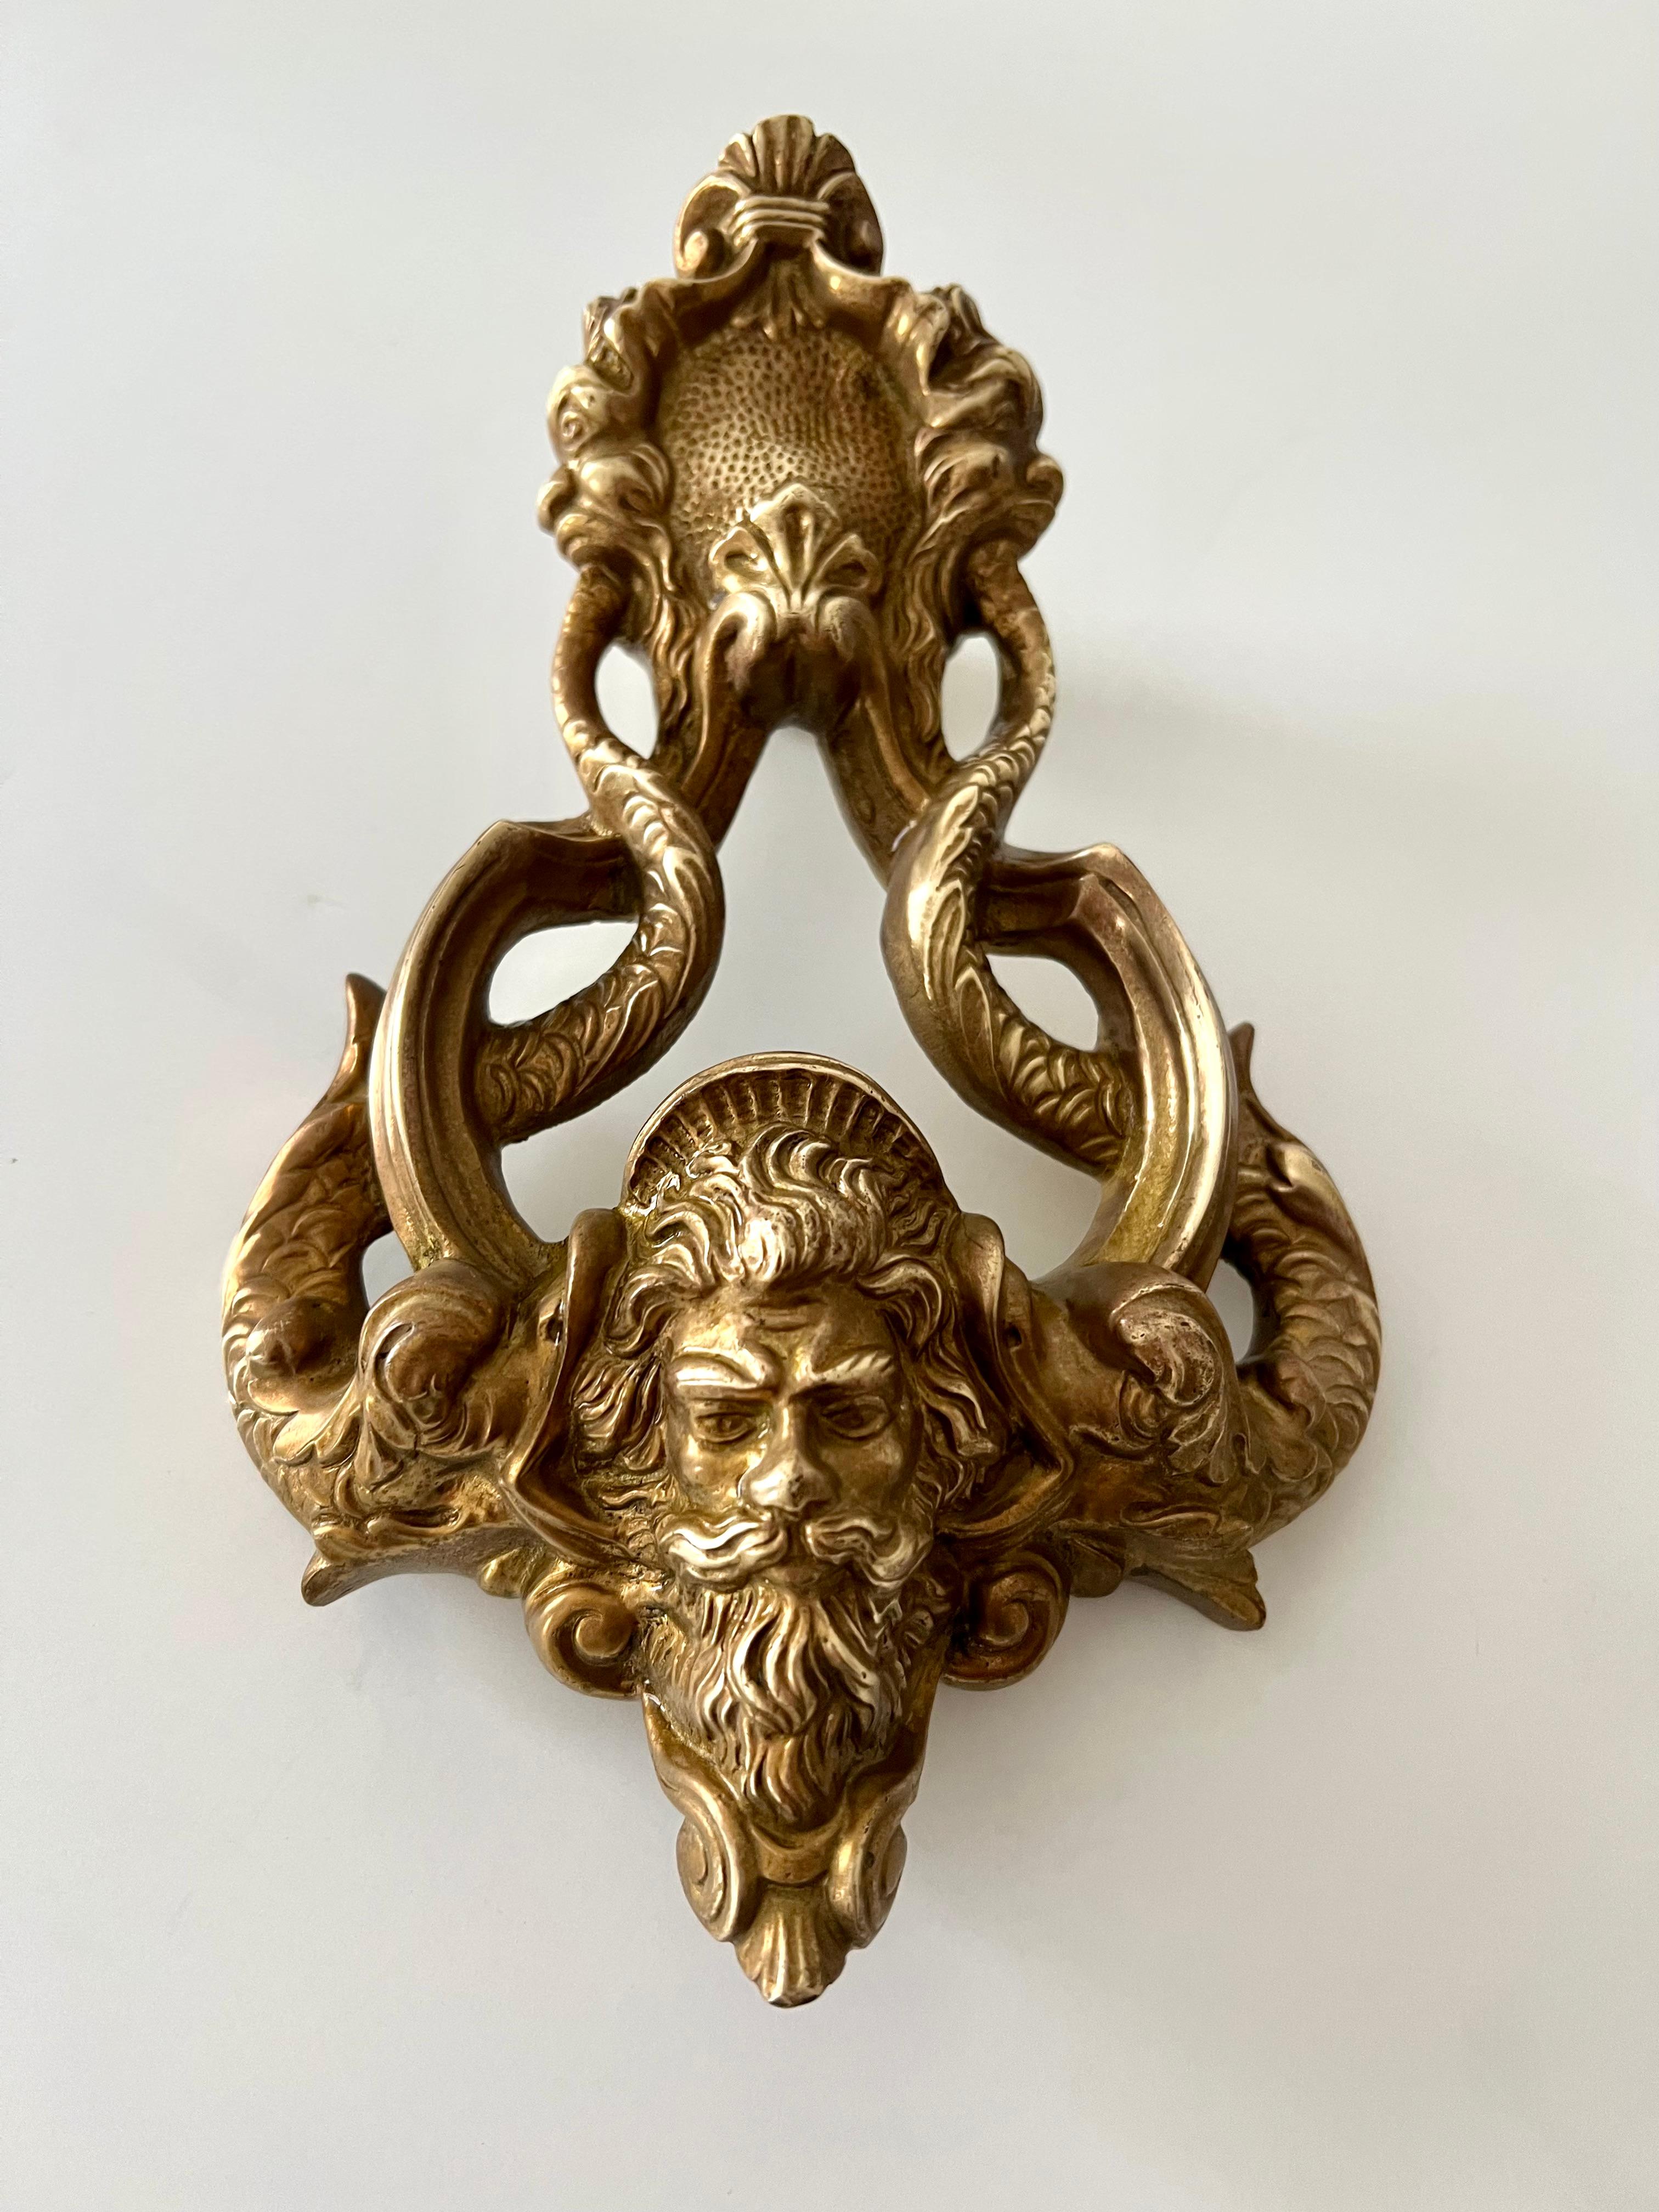 Patinated Solid Brass Spanish Door Knocker with Zeus and Dolphins Intertwined